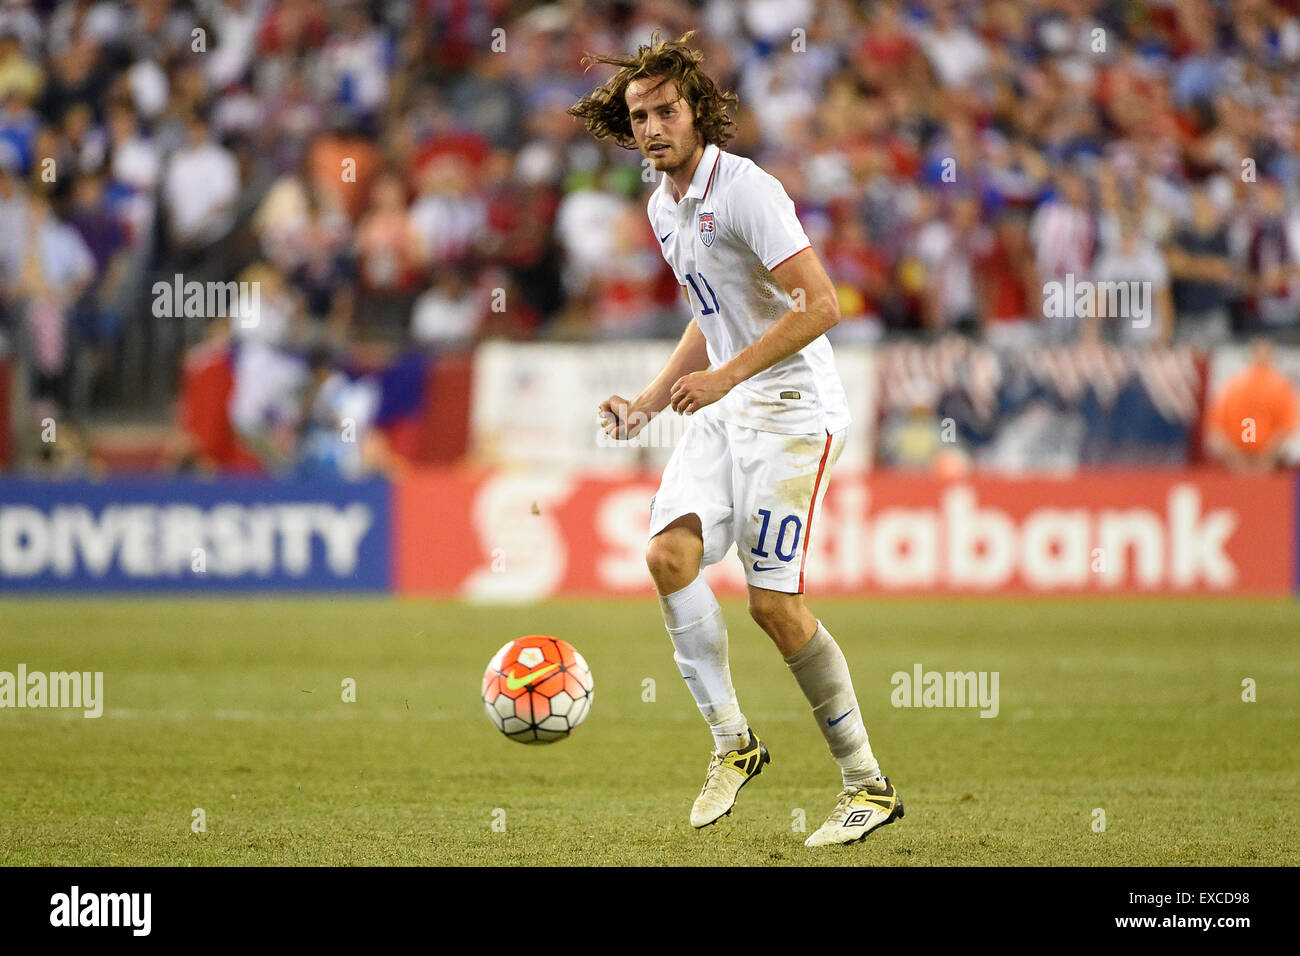 Foxborough, Massachusetts, USA. 10th July, 2015. United States midfielder Mix Diskerud (10) in game action during the CONCACAF Gold Cup group stage match between USA and Haiti held at Gillette Stadium, in Foxborough Massachusetts. USA defeated Haiti 1-0. Eric Canha/CSM/Alamy Live News Stock Photo